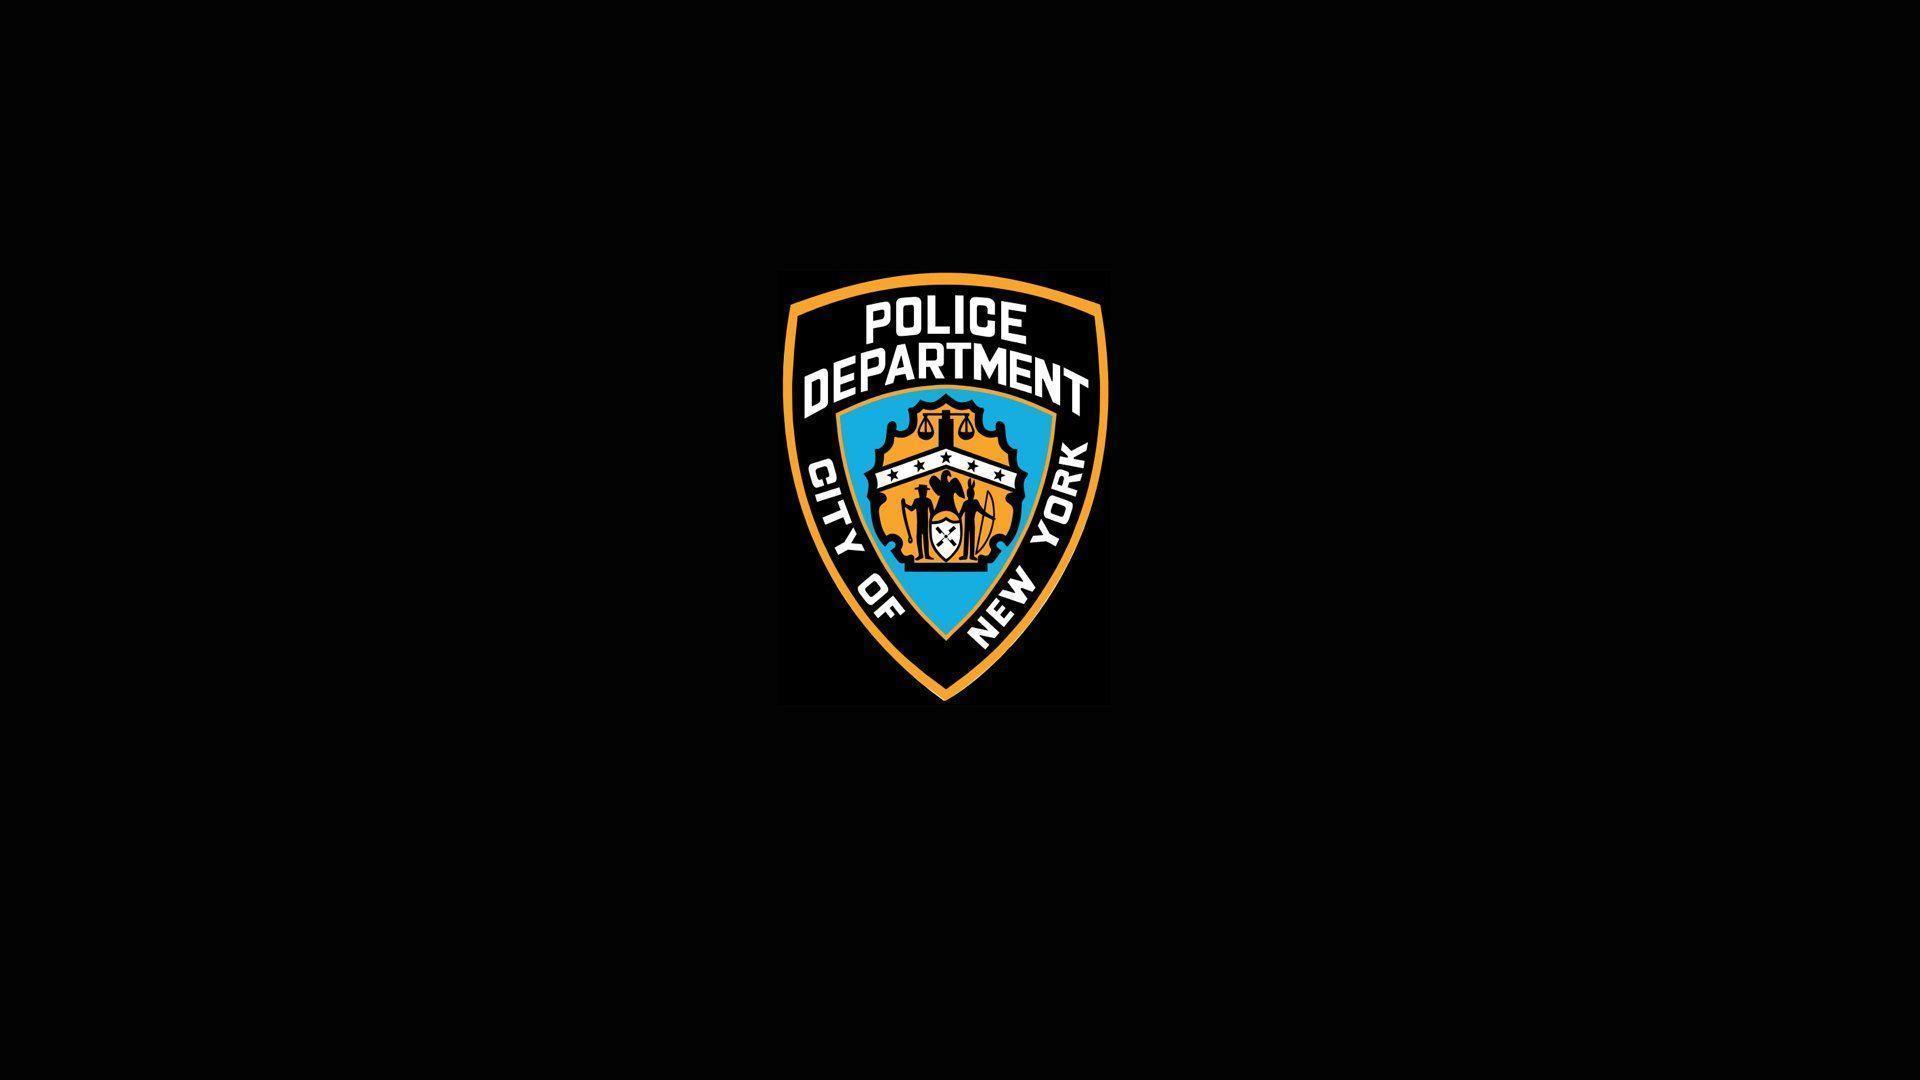 NYPD Wallpaper Free NYPD Background